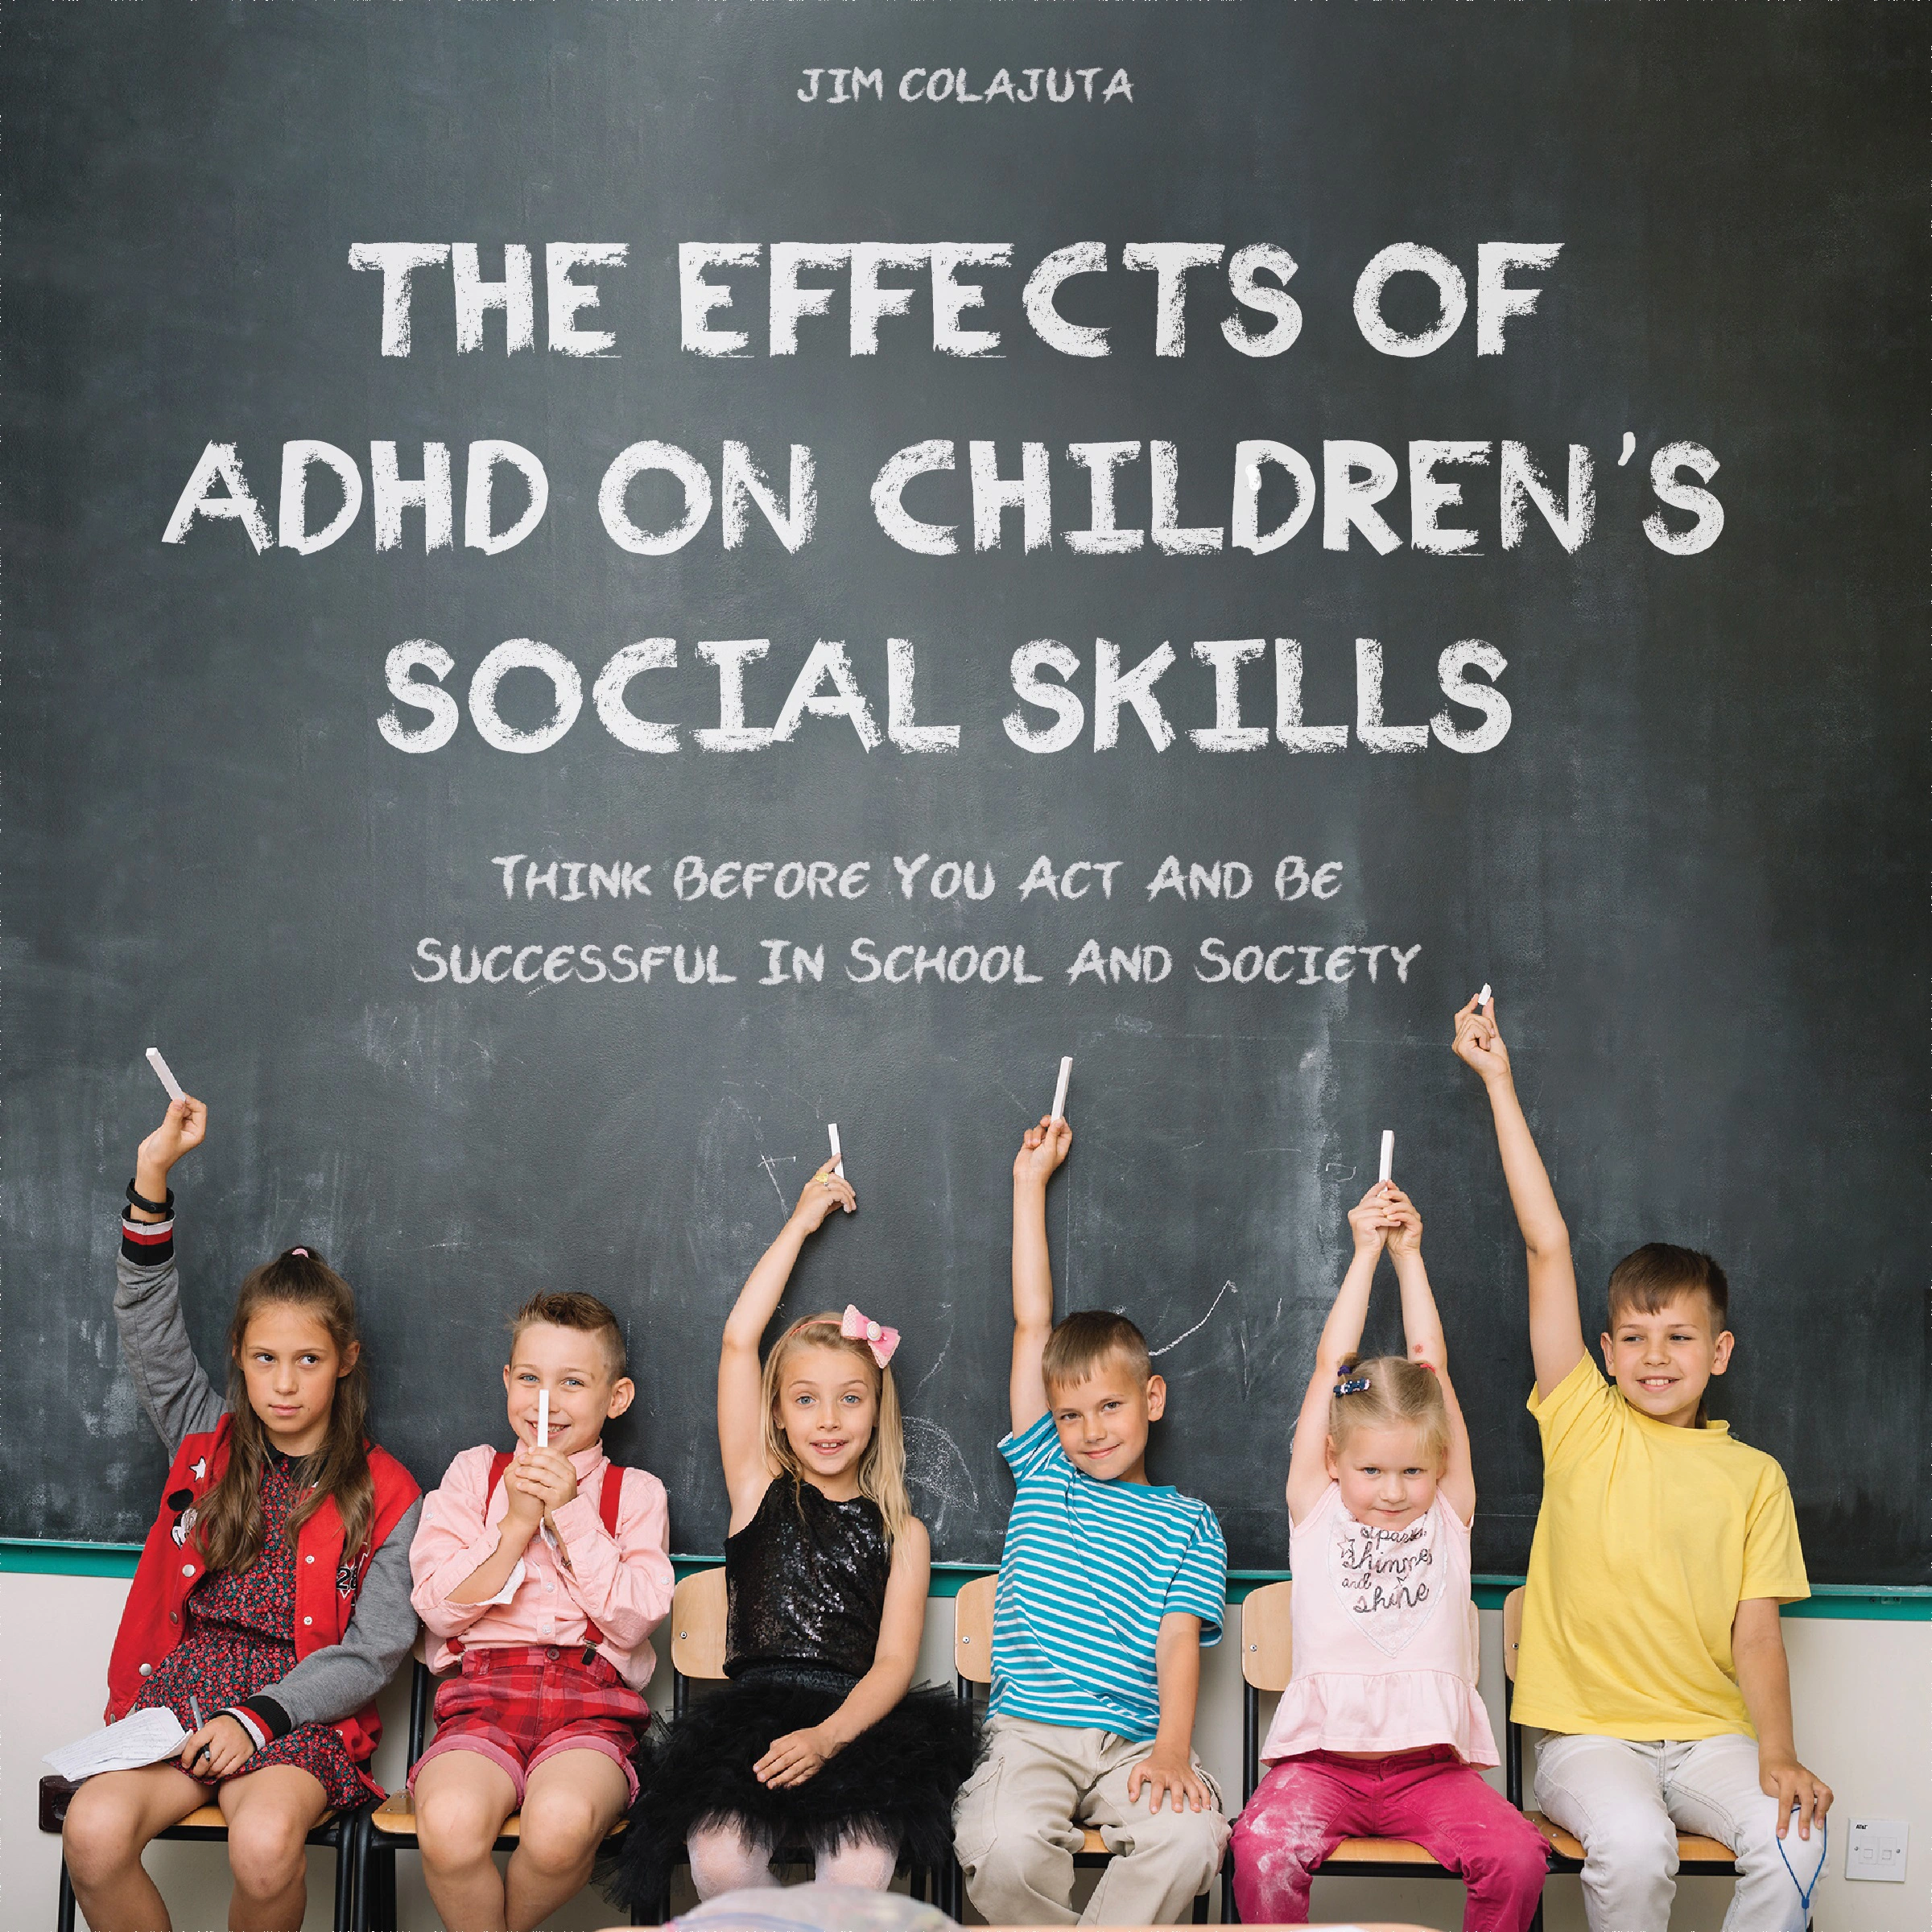 The Effects of ADHD on Children's Social Skills Audiobook by Jim Colajuta